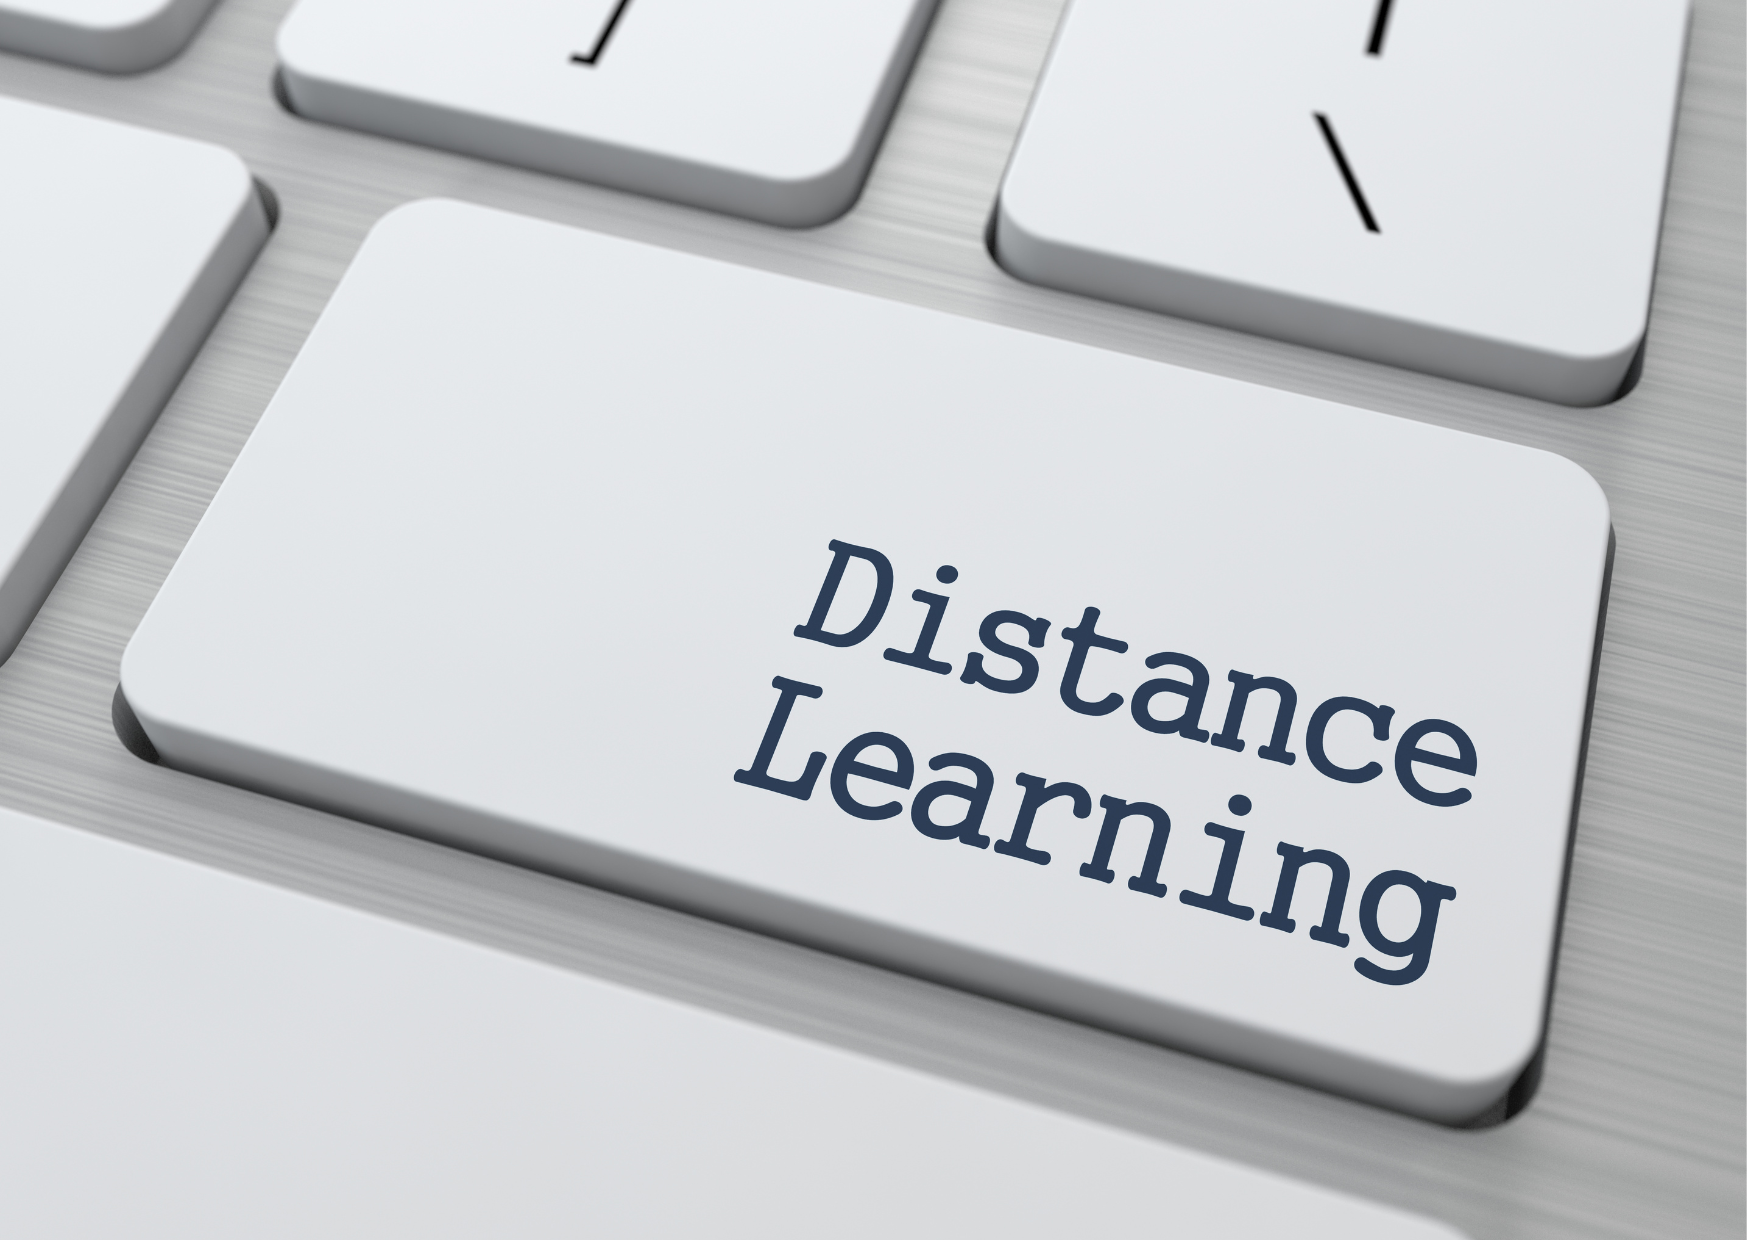 Advantages and Disadvantages of Distance Learning